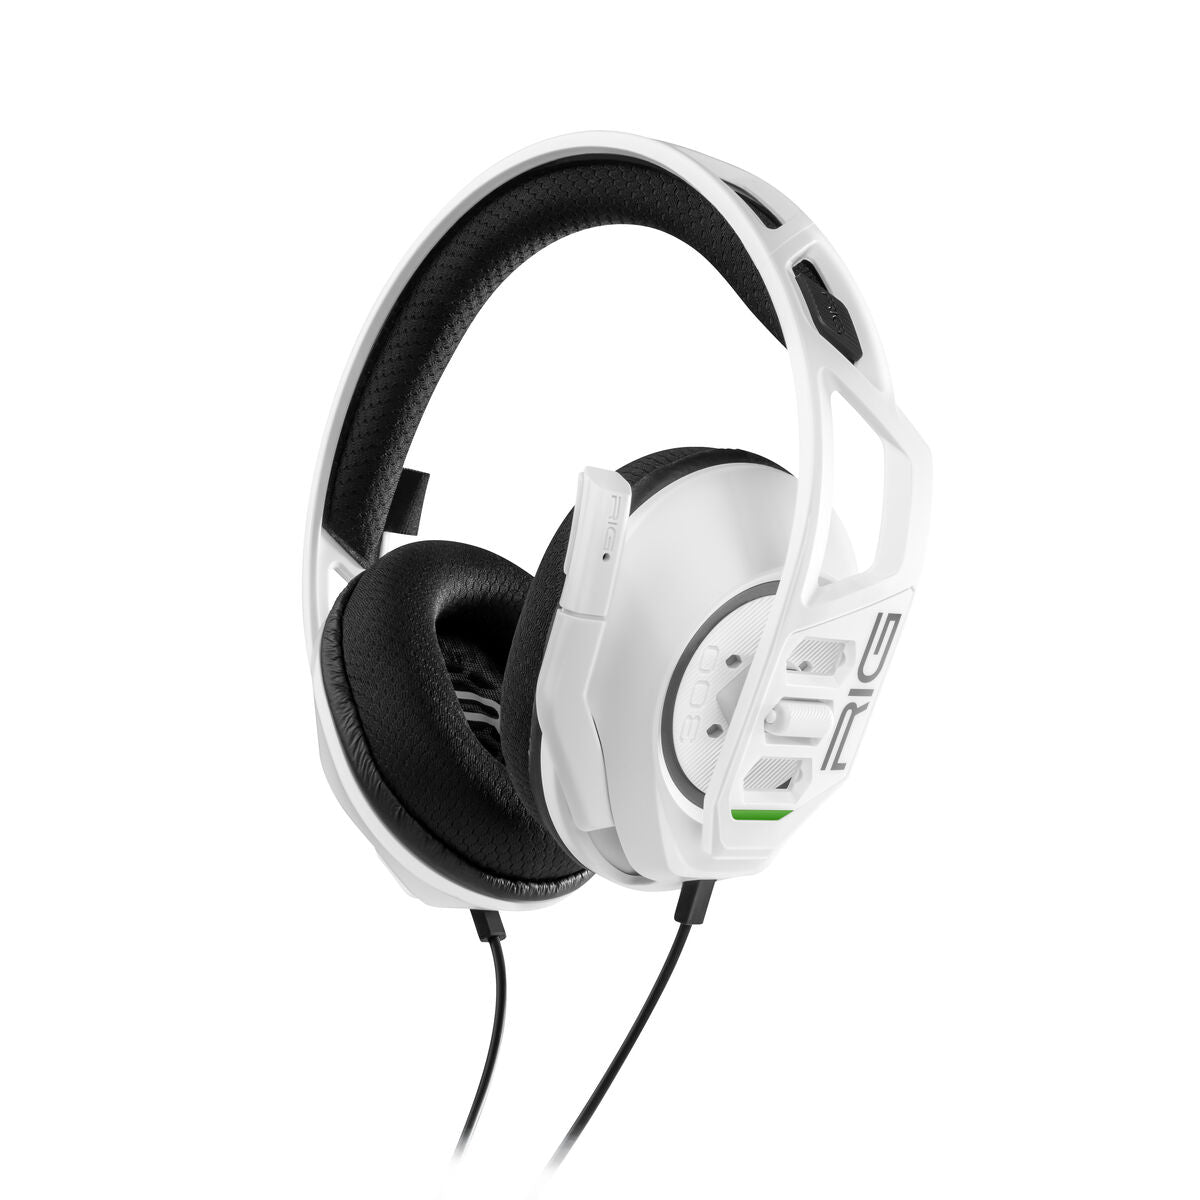 Headphones Nacon RIG 300 PRO HX, Nacon, Electronics, Mobile communication and accessories, headphones-nacon-rig-300-pro-hx, :Wired Headphones, Brand_Nacon, category-reference-2609, category-reference-2642, category-reference-2847, category-reference-t-19653, category-reference-t-21312, category-reference-t-4036, category-reference-t-4037, computers / peripherals, Condition_NEW, entertainment, gadget, music, office, Price_20 - 50, telephones & tablets, Teleworking, RiotNook